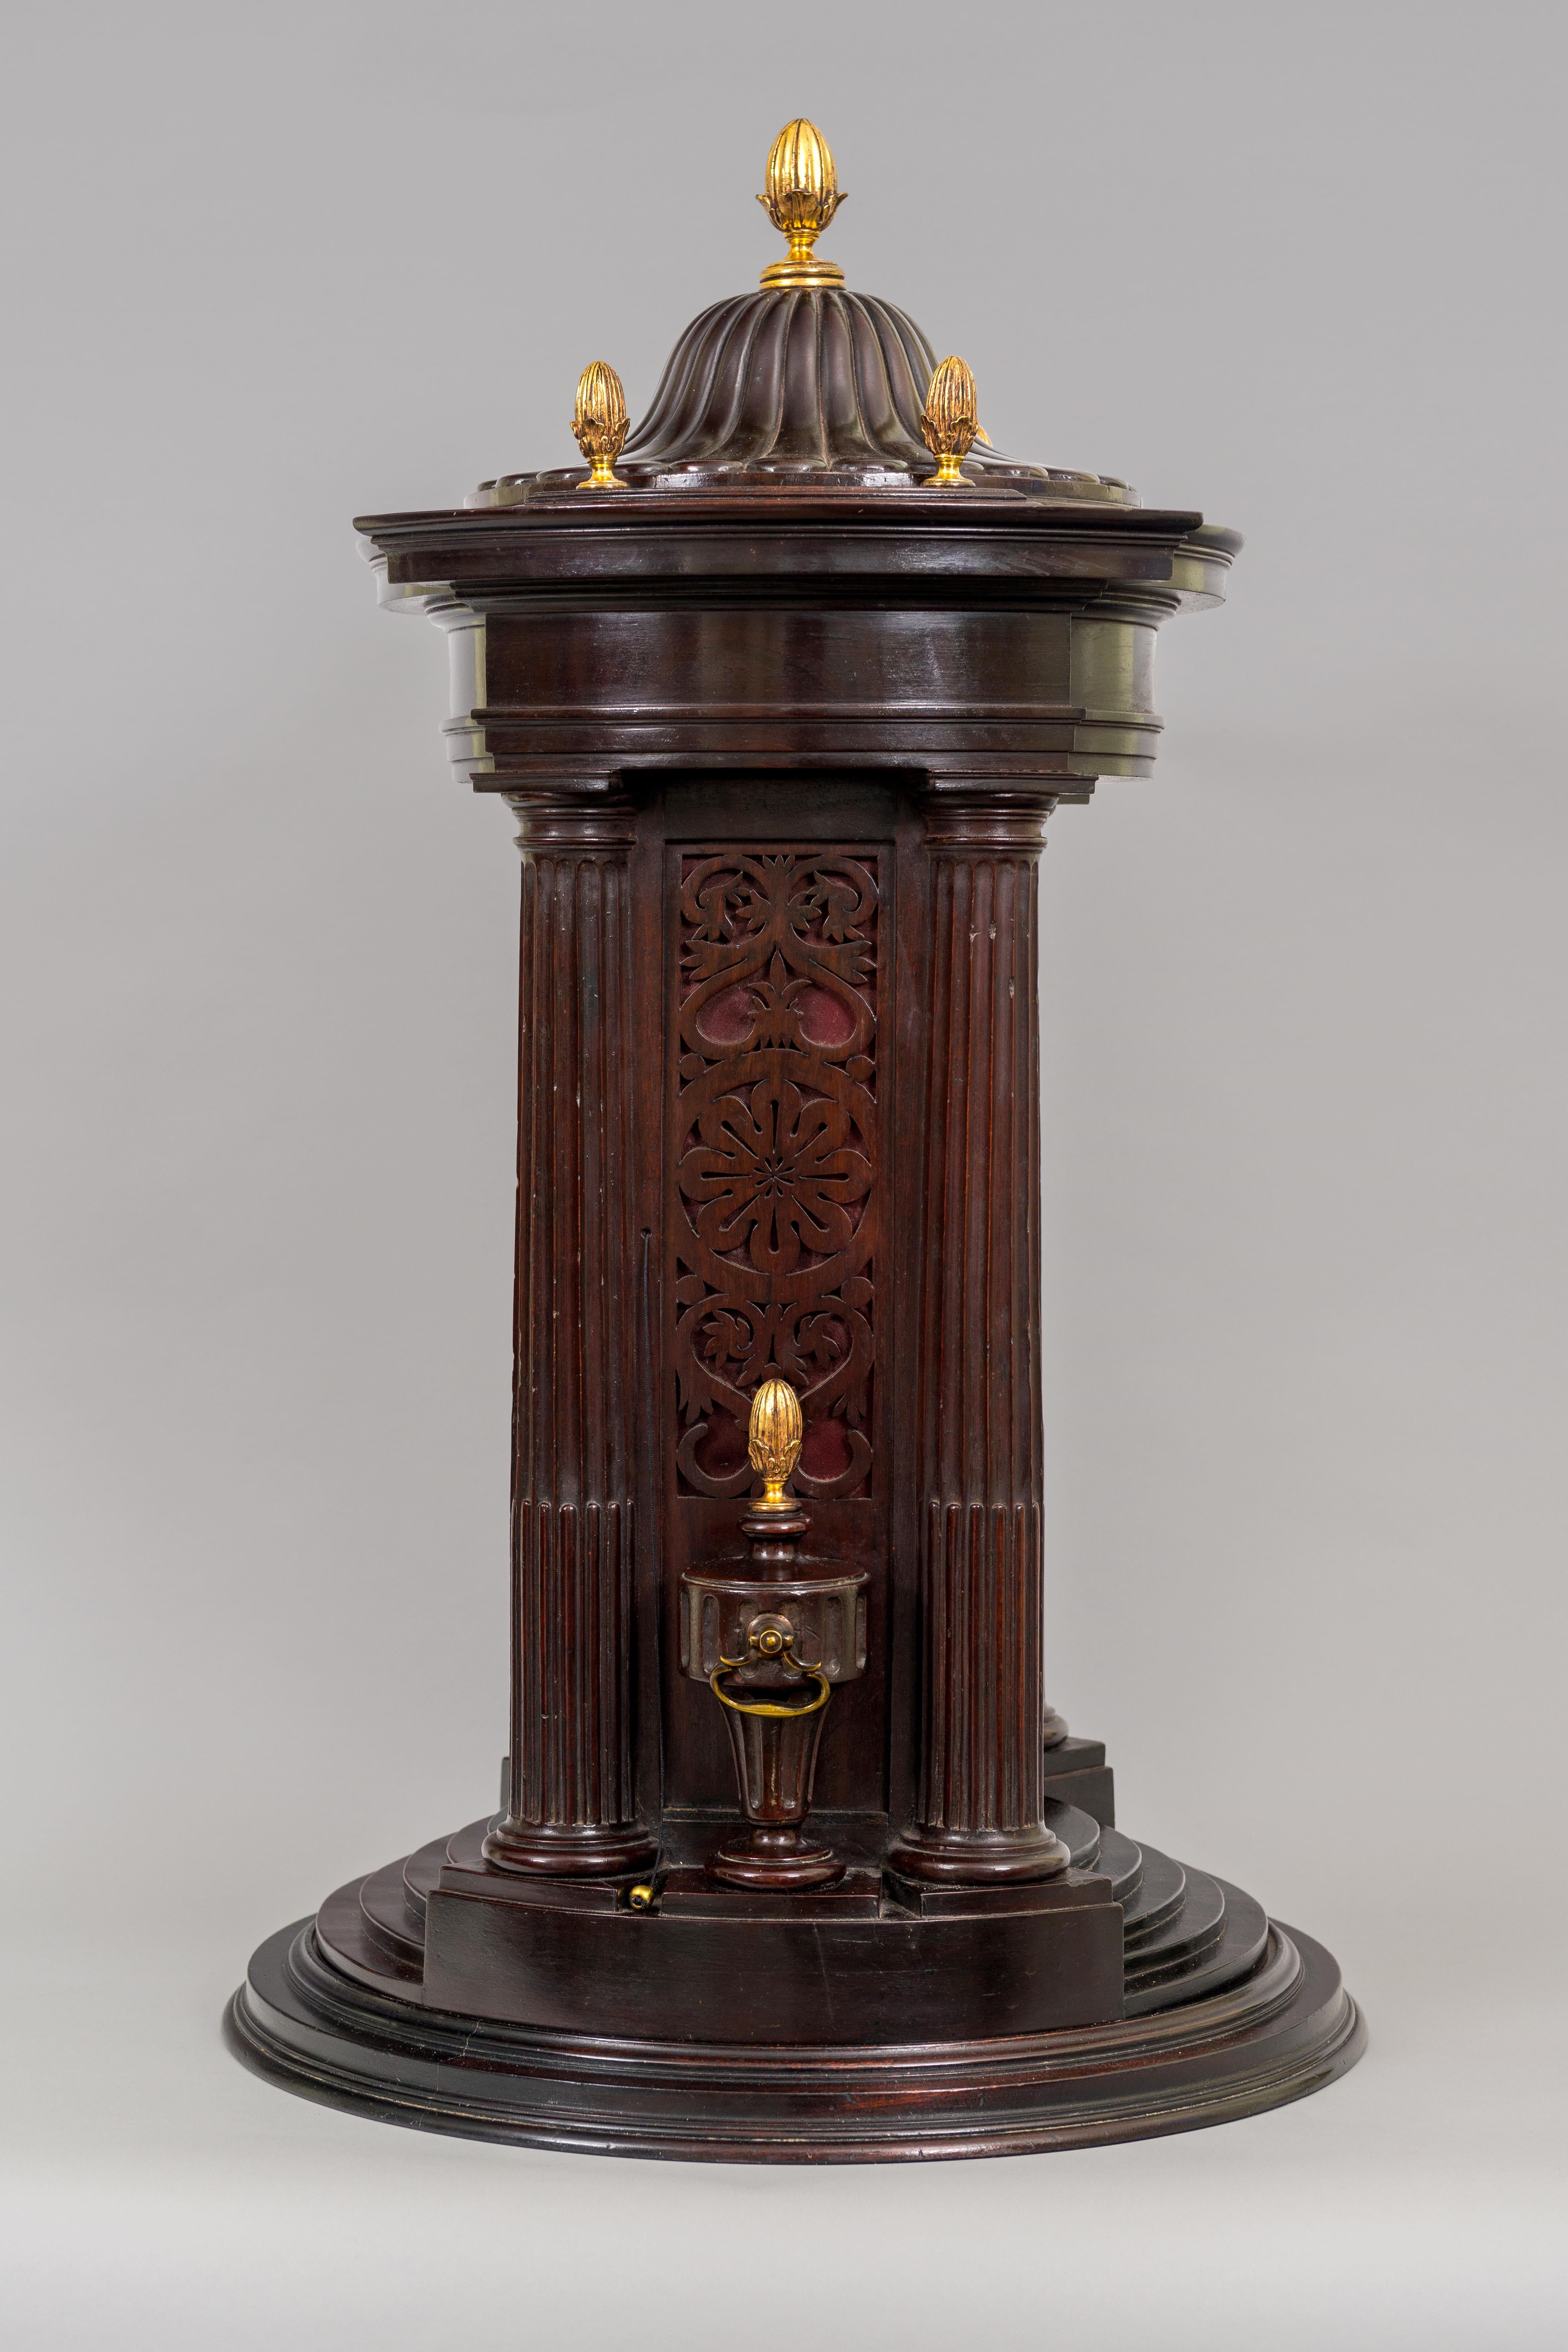 Gilt 18th Century Antique Mahogany Musical Table Clock by Ralph Gout of London For Sale